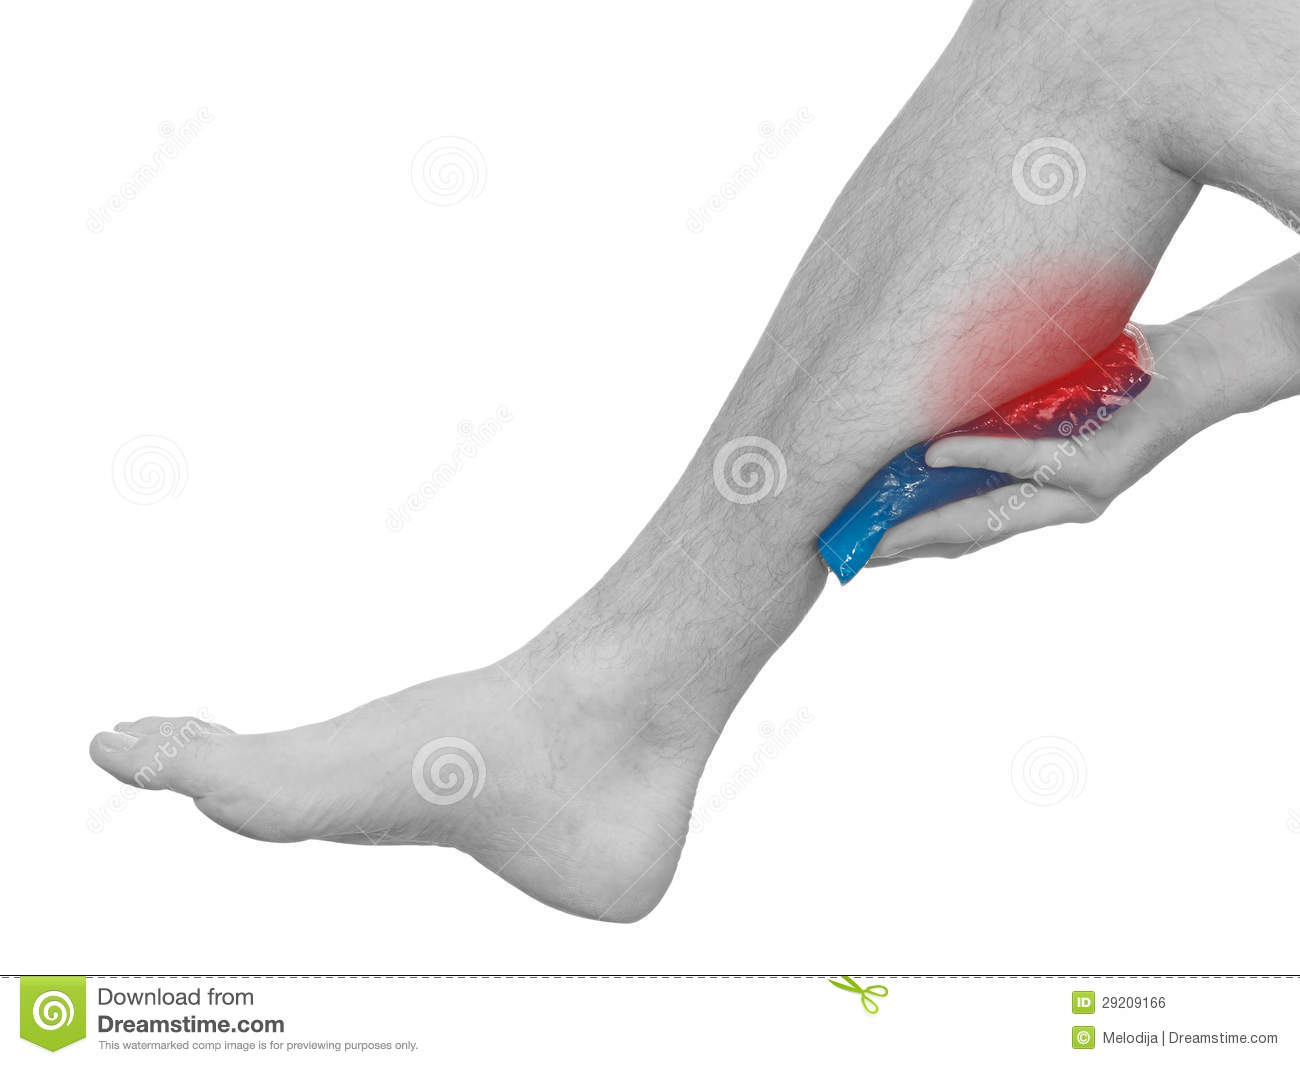 Cool Gel Pack On A Swollen Hurting Leg  Royalty Free Stock Image